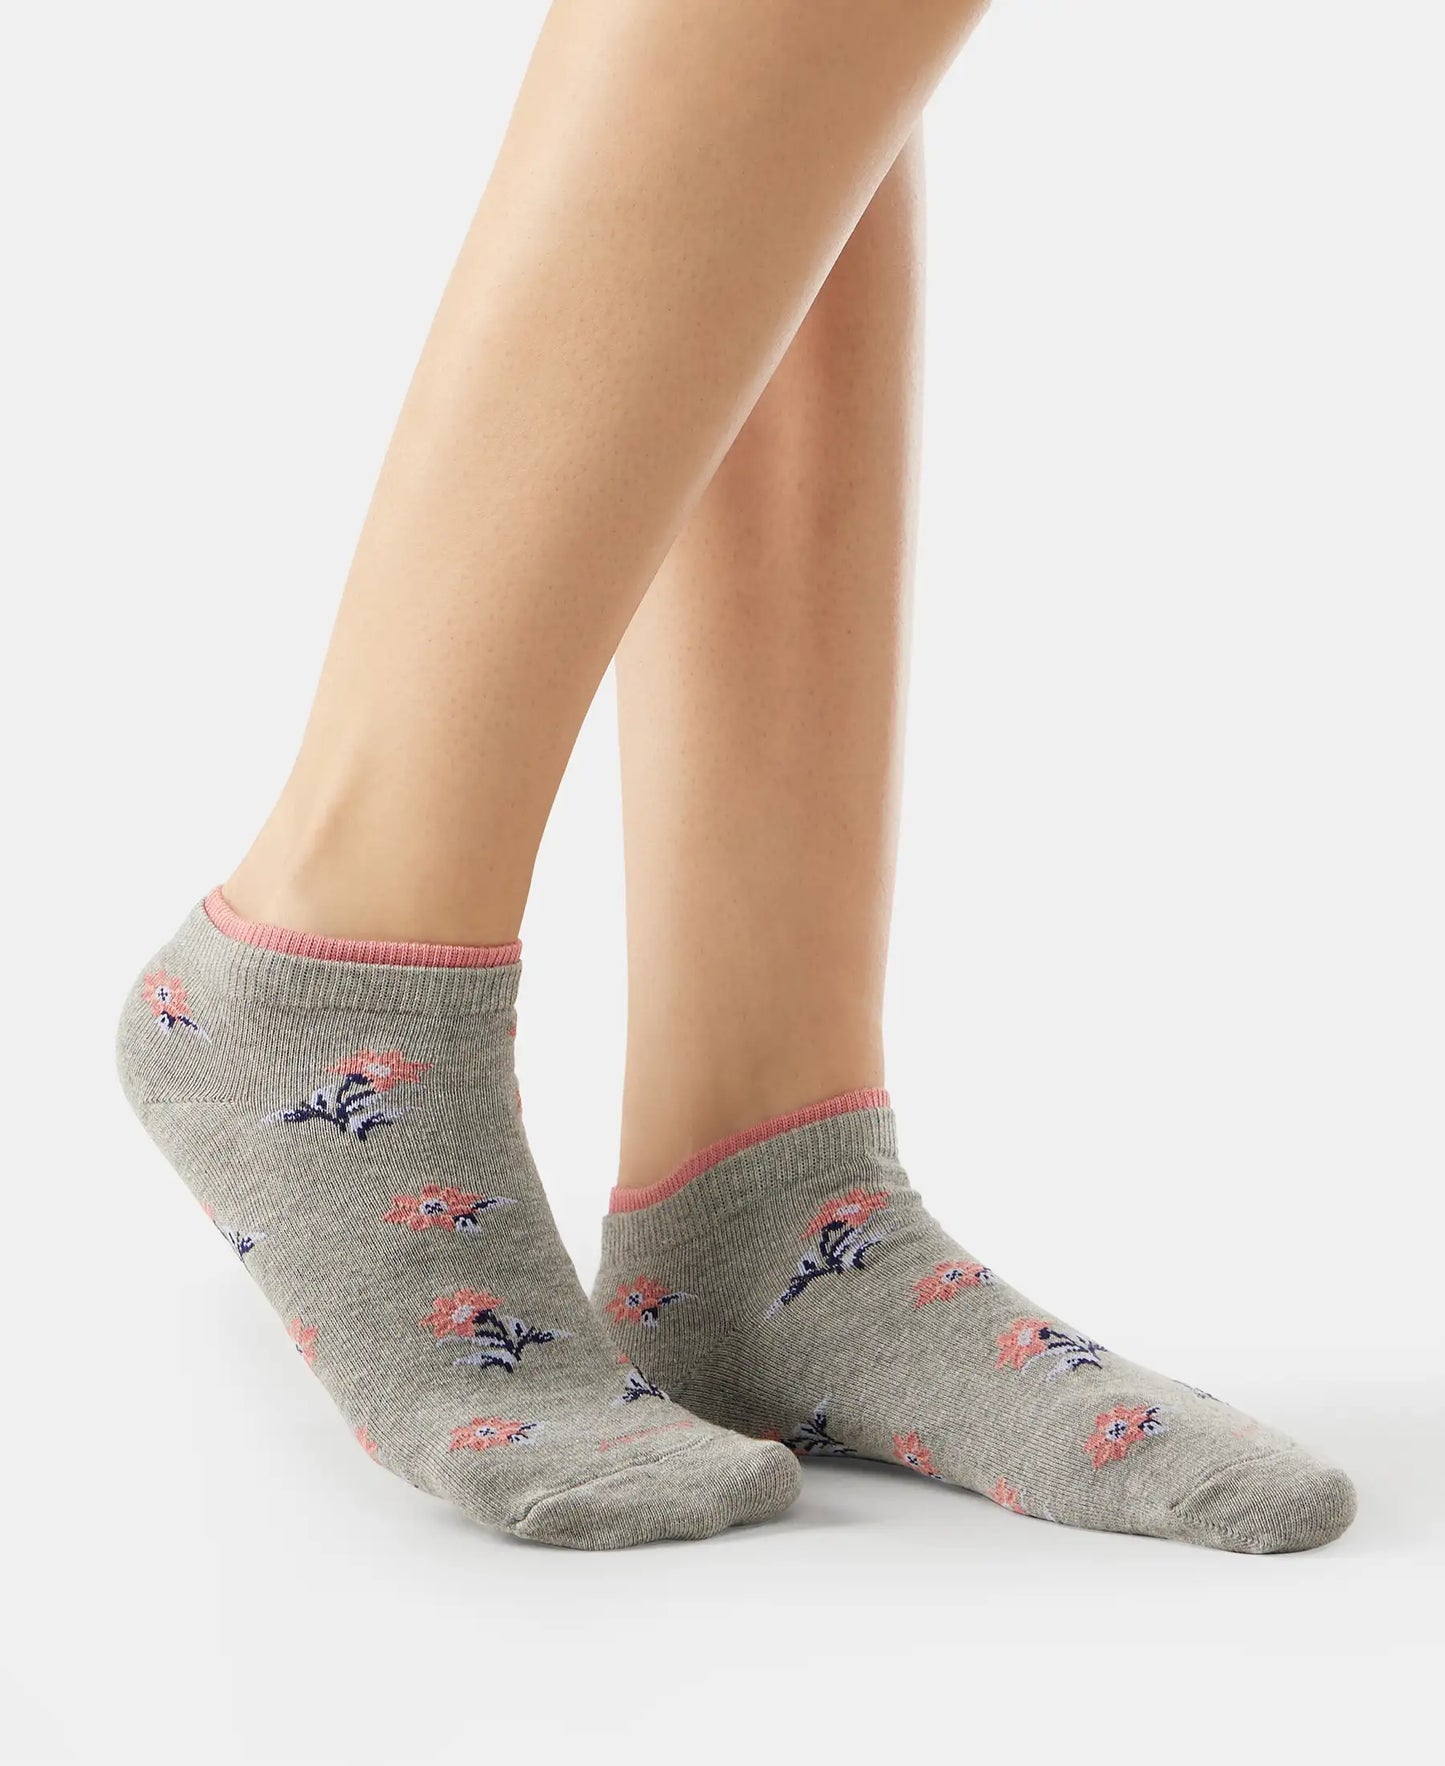 Compact Cotton Stretch Low Show Socks with StayFresh Treatment - Light Grey Melange & Navy-4